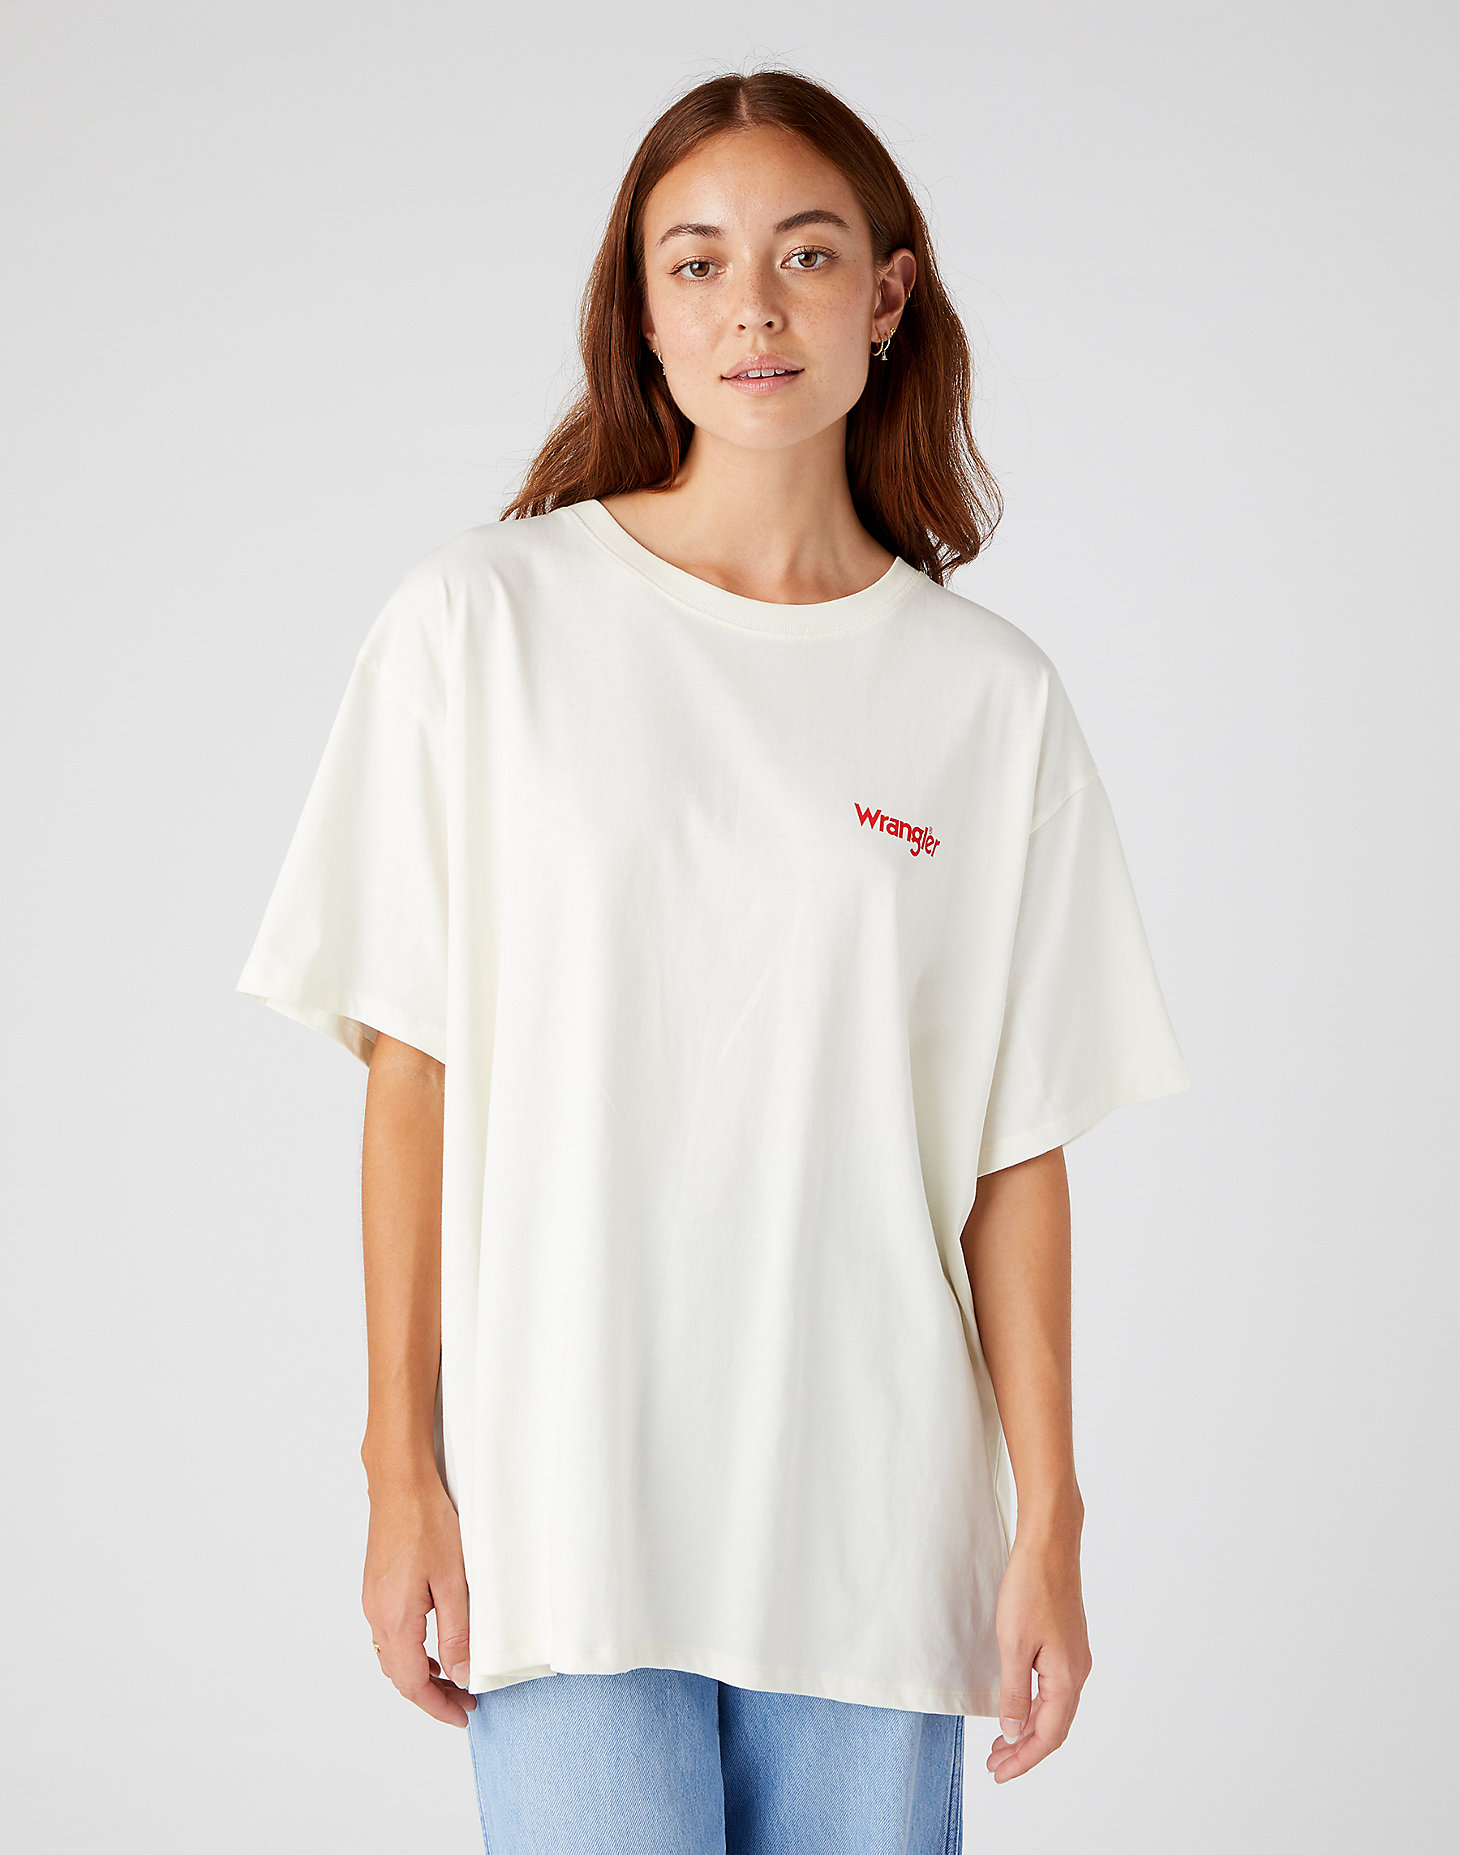 Oversized Tee in Ivory alternative view 2